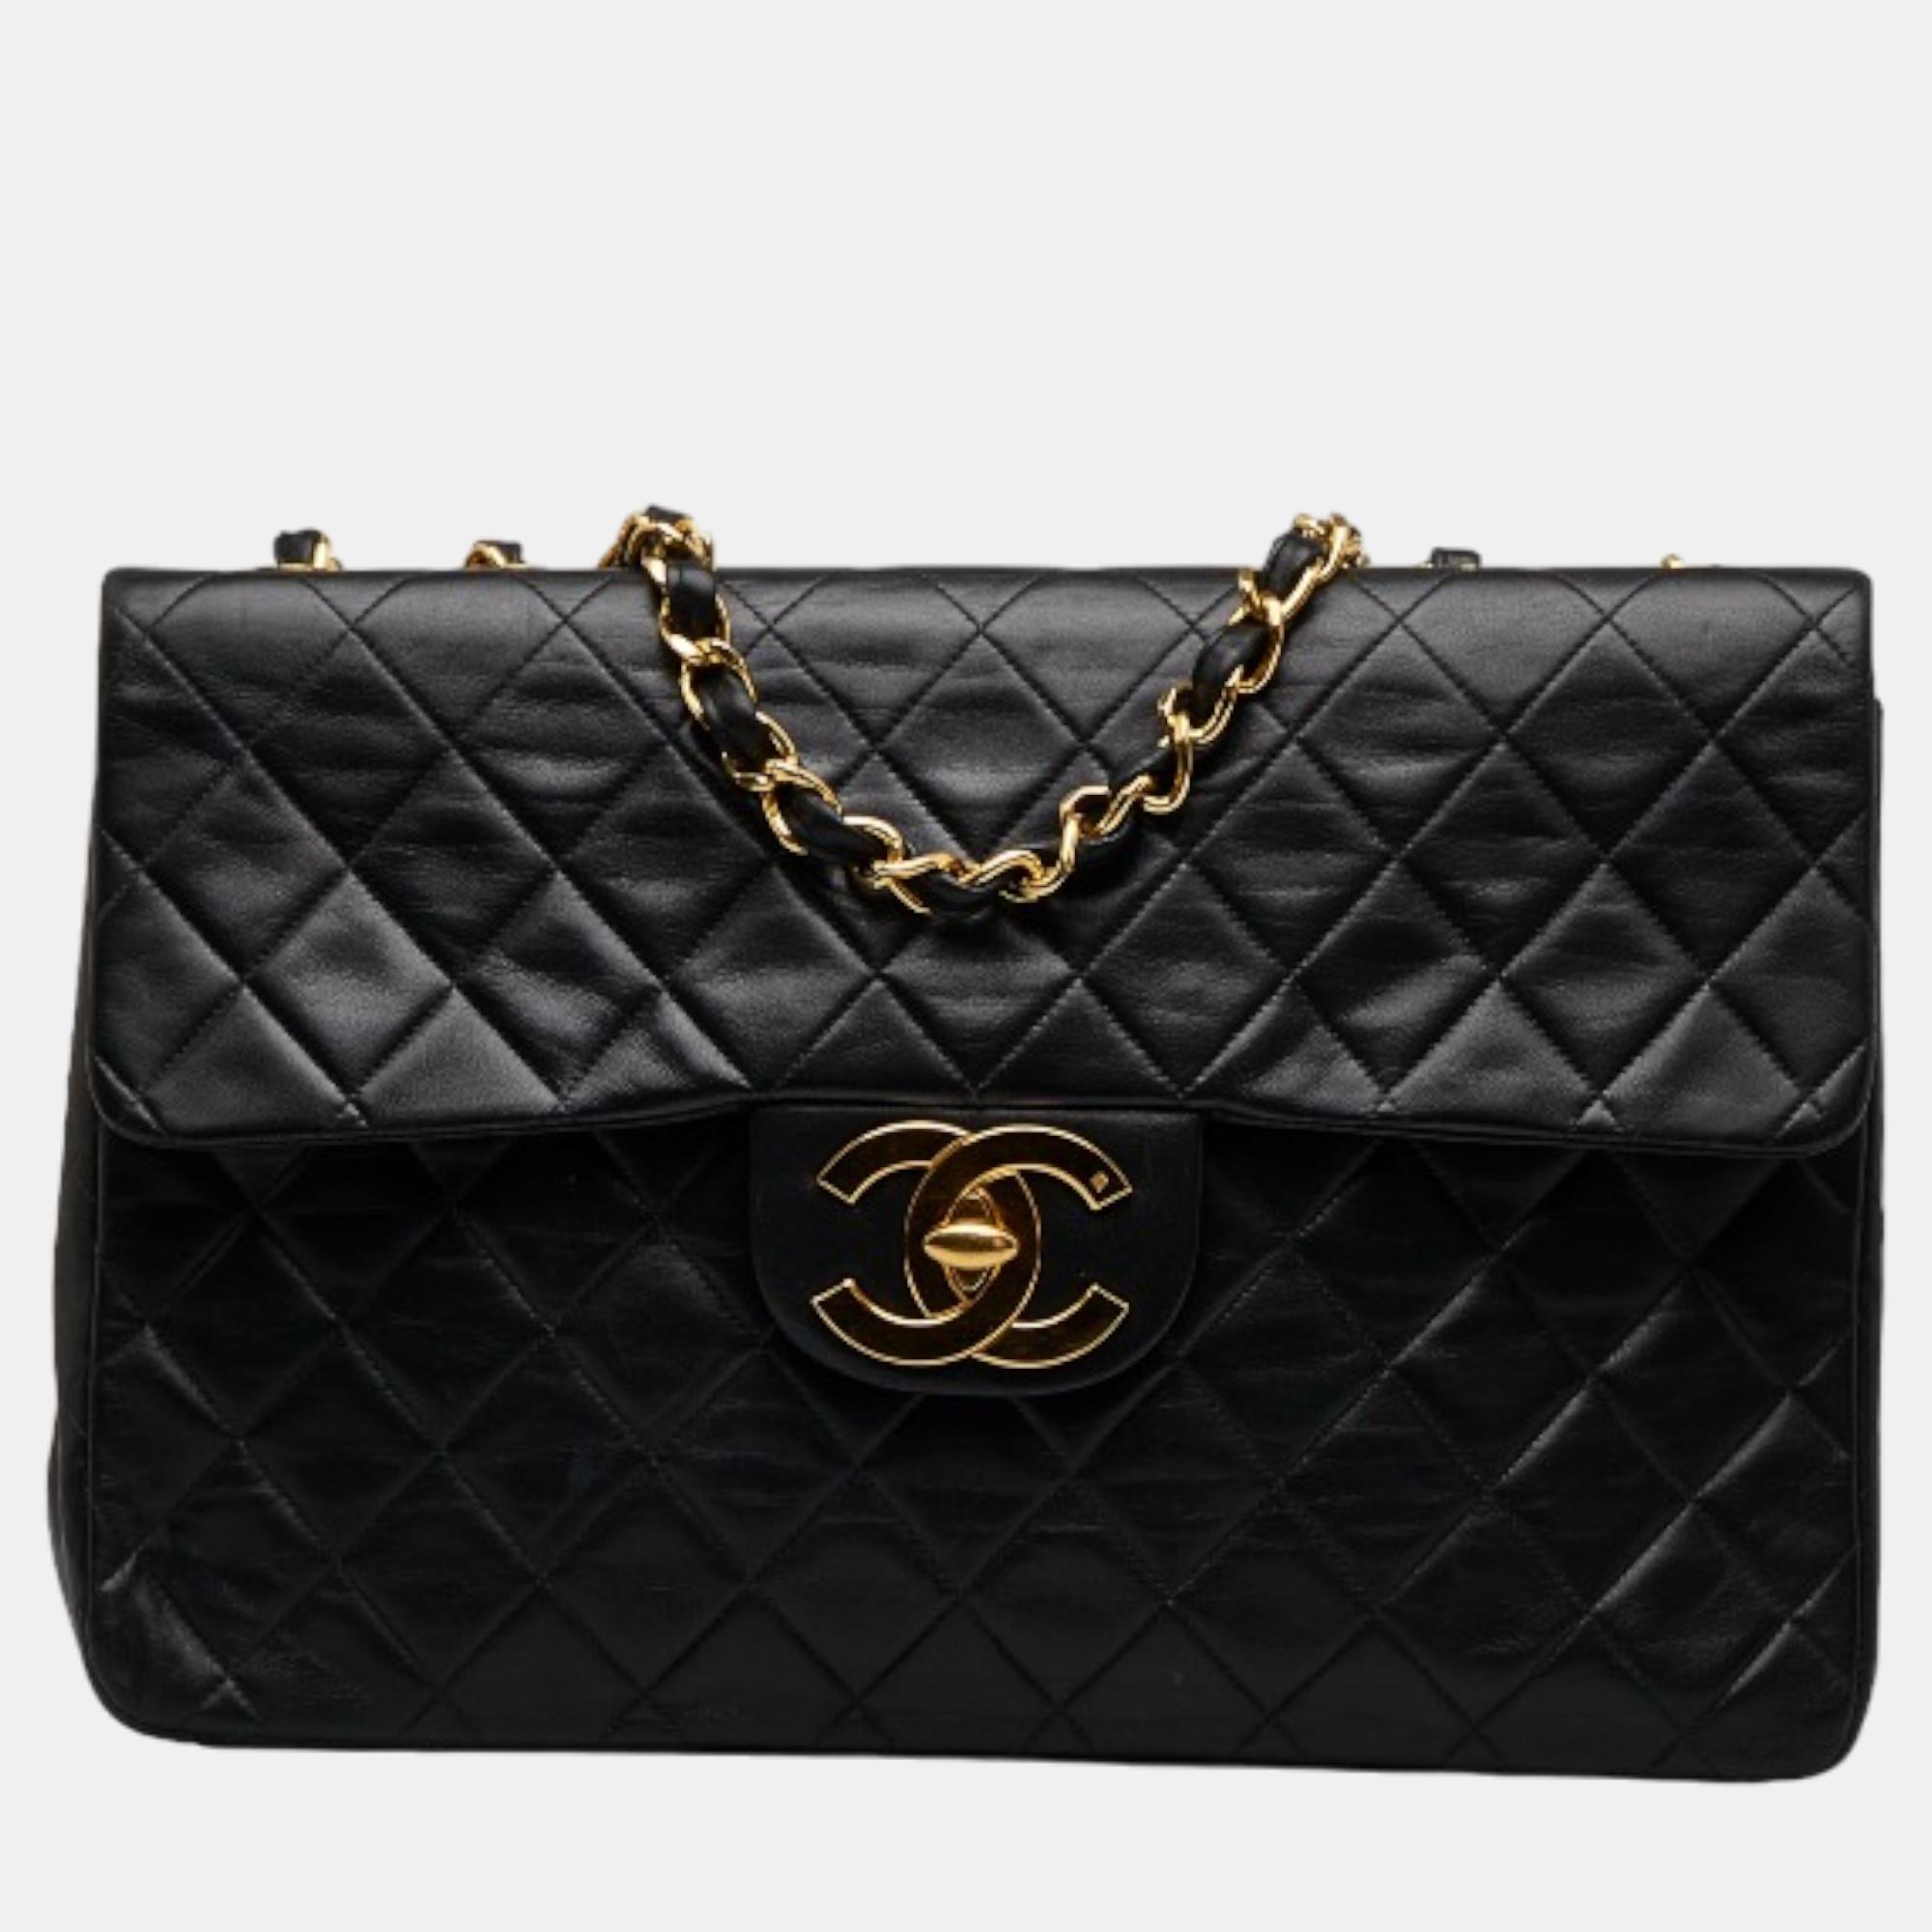 Pre-owned Chanel Black Leather Maxi Classic Single Flap Bag